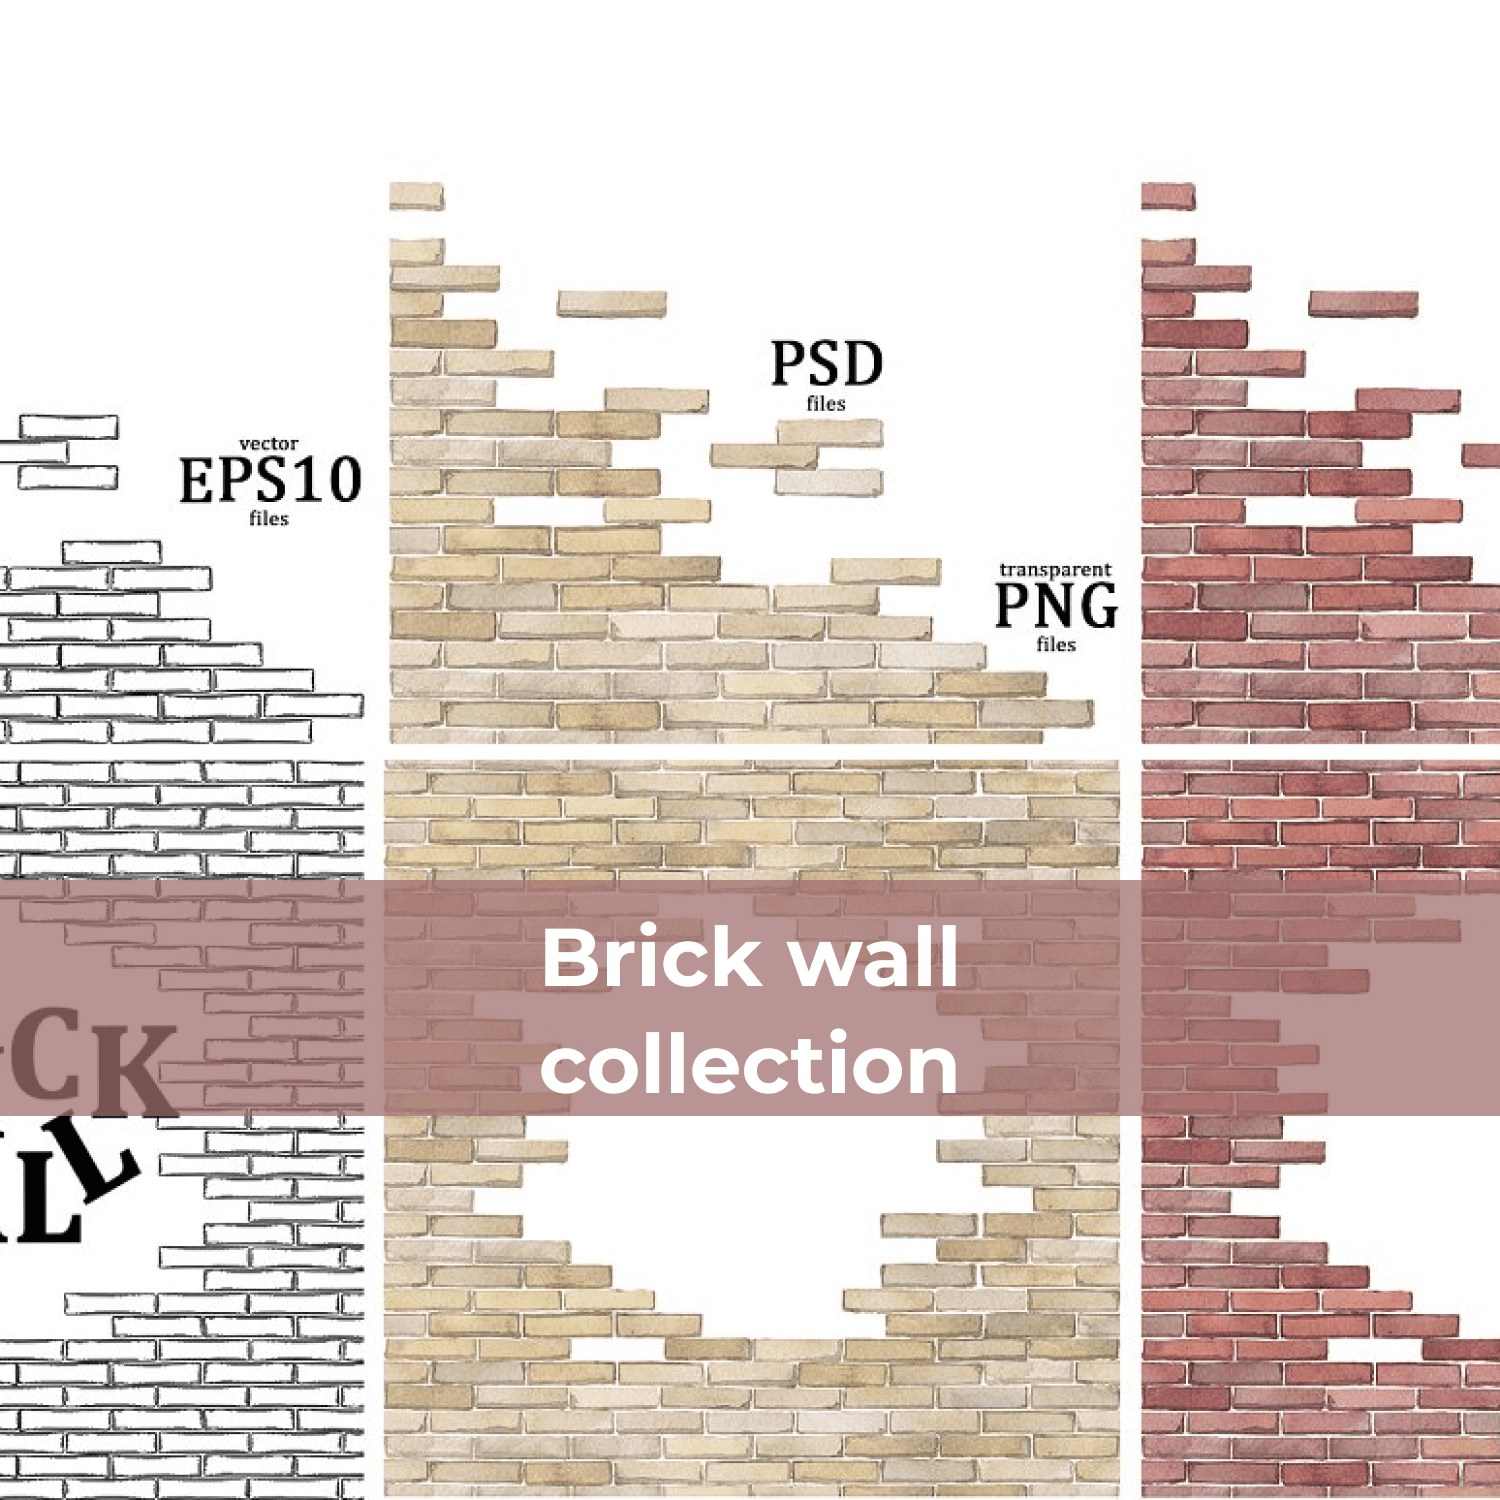 Brick Wall Collection cover.